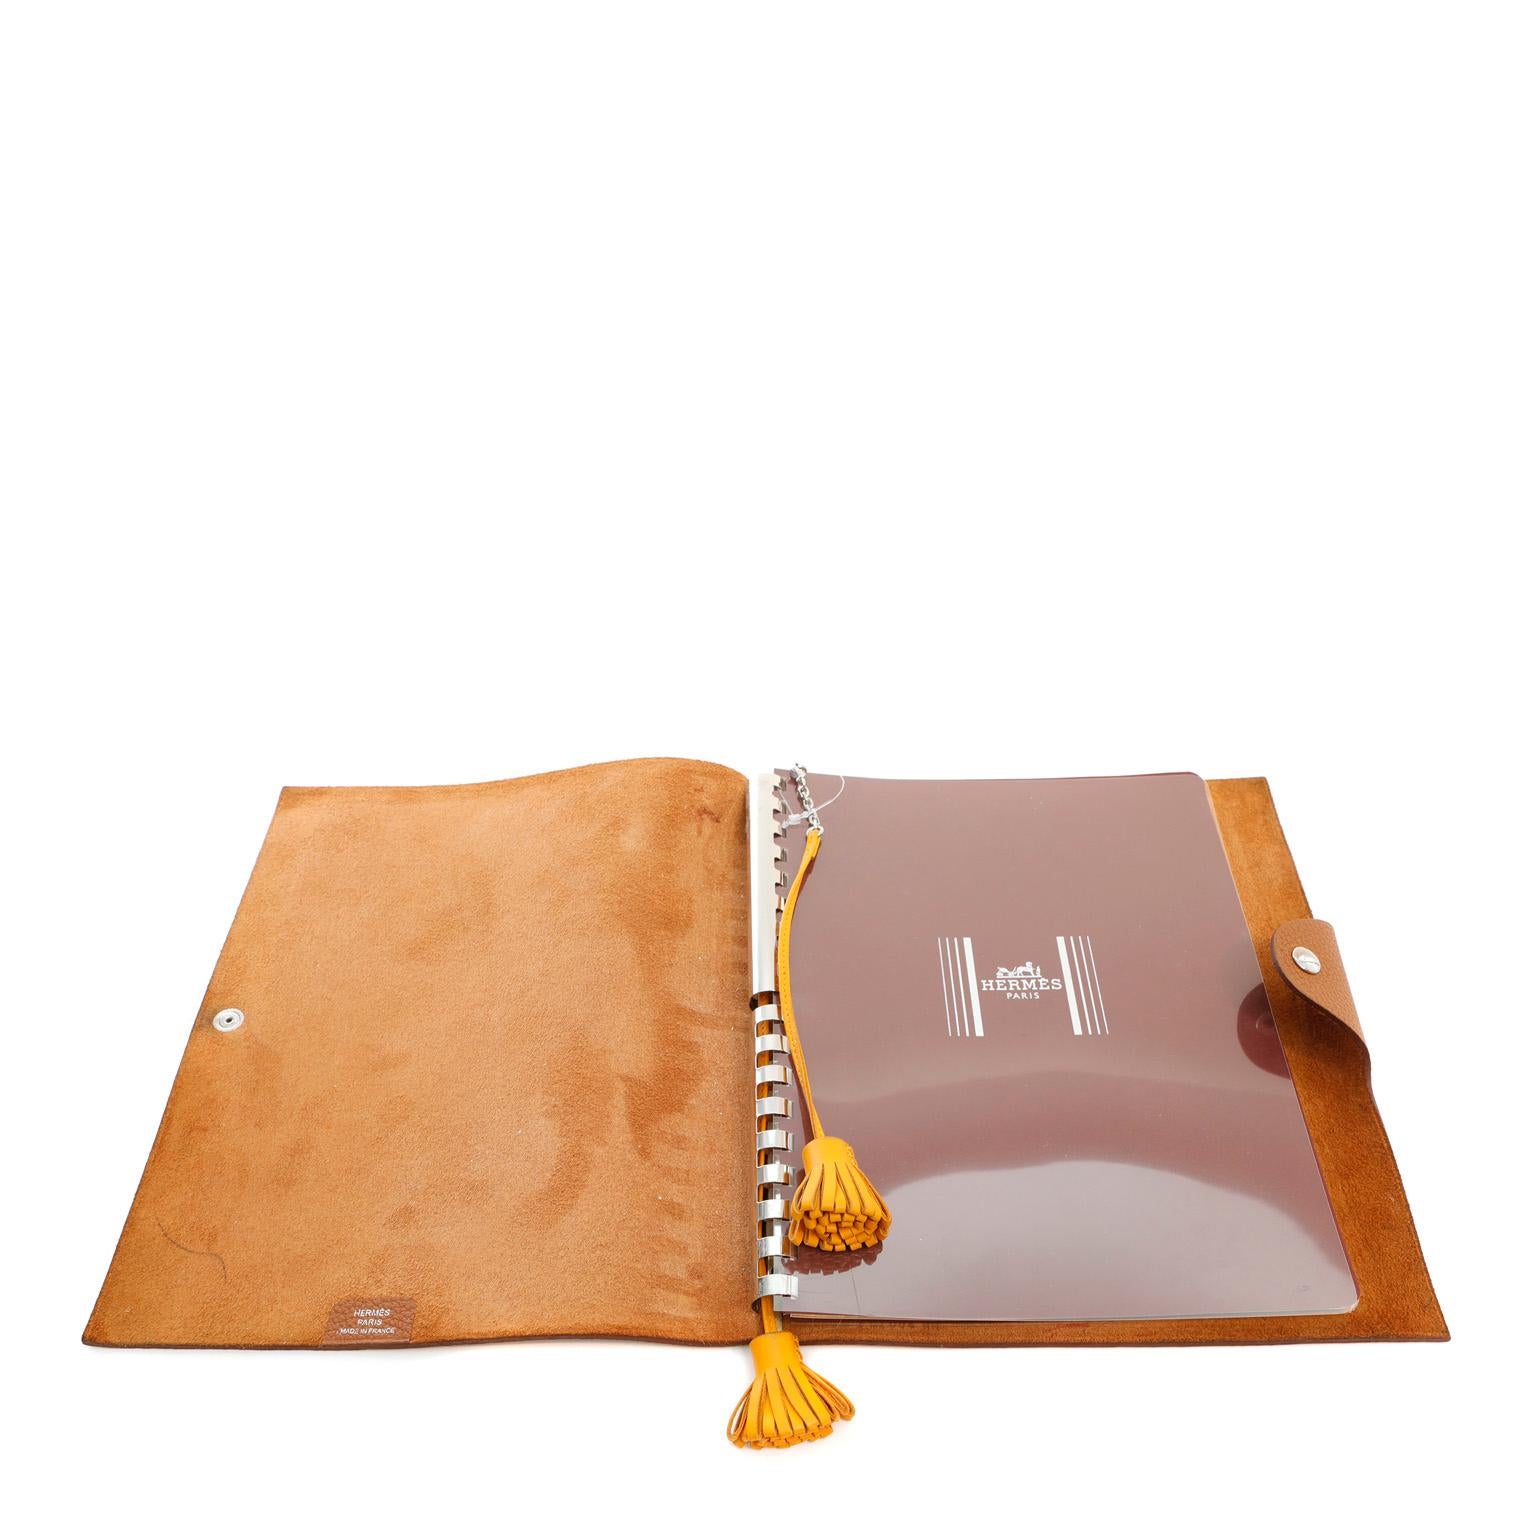 This authentic Hermès Brown Togo Notepad Cover is in pristine condition; never used.  Durable and textured Togo leather snap closure notebook cover is elegant and dignified in golden brown. 9” x 7.5”

PBF 12348